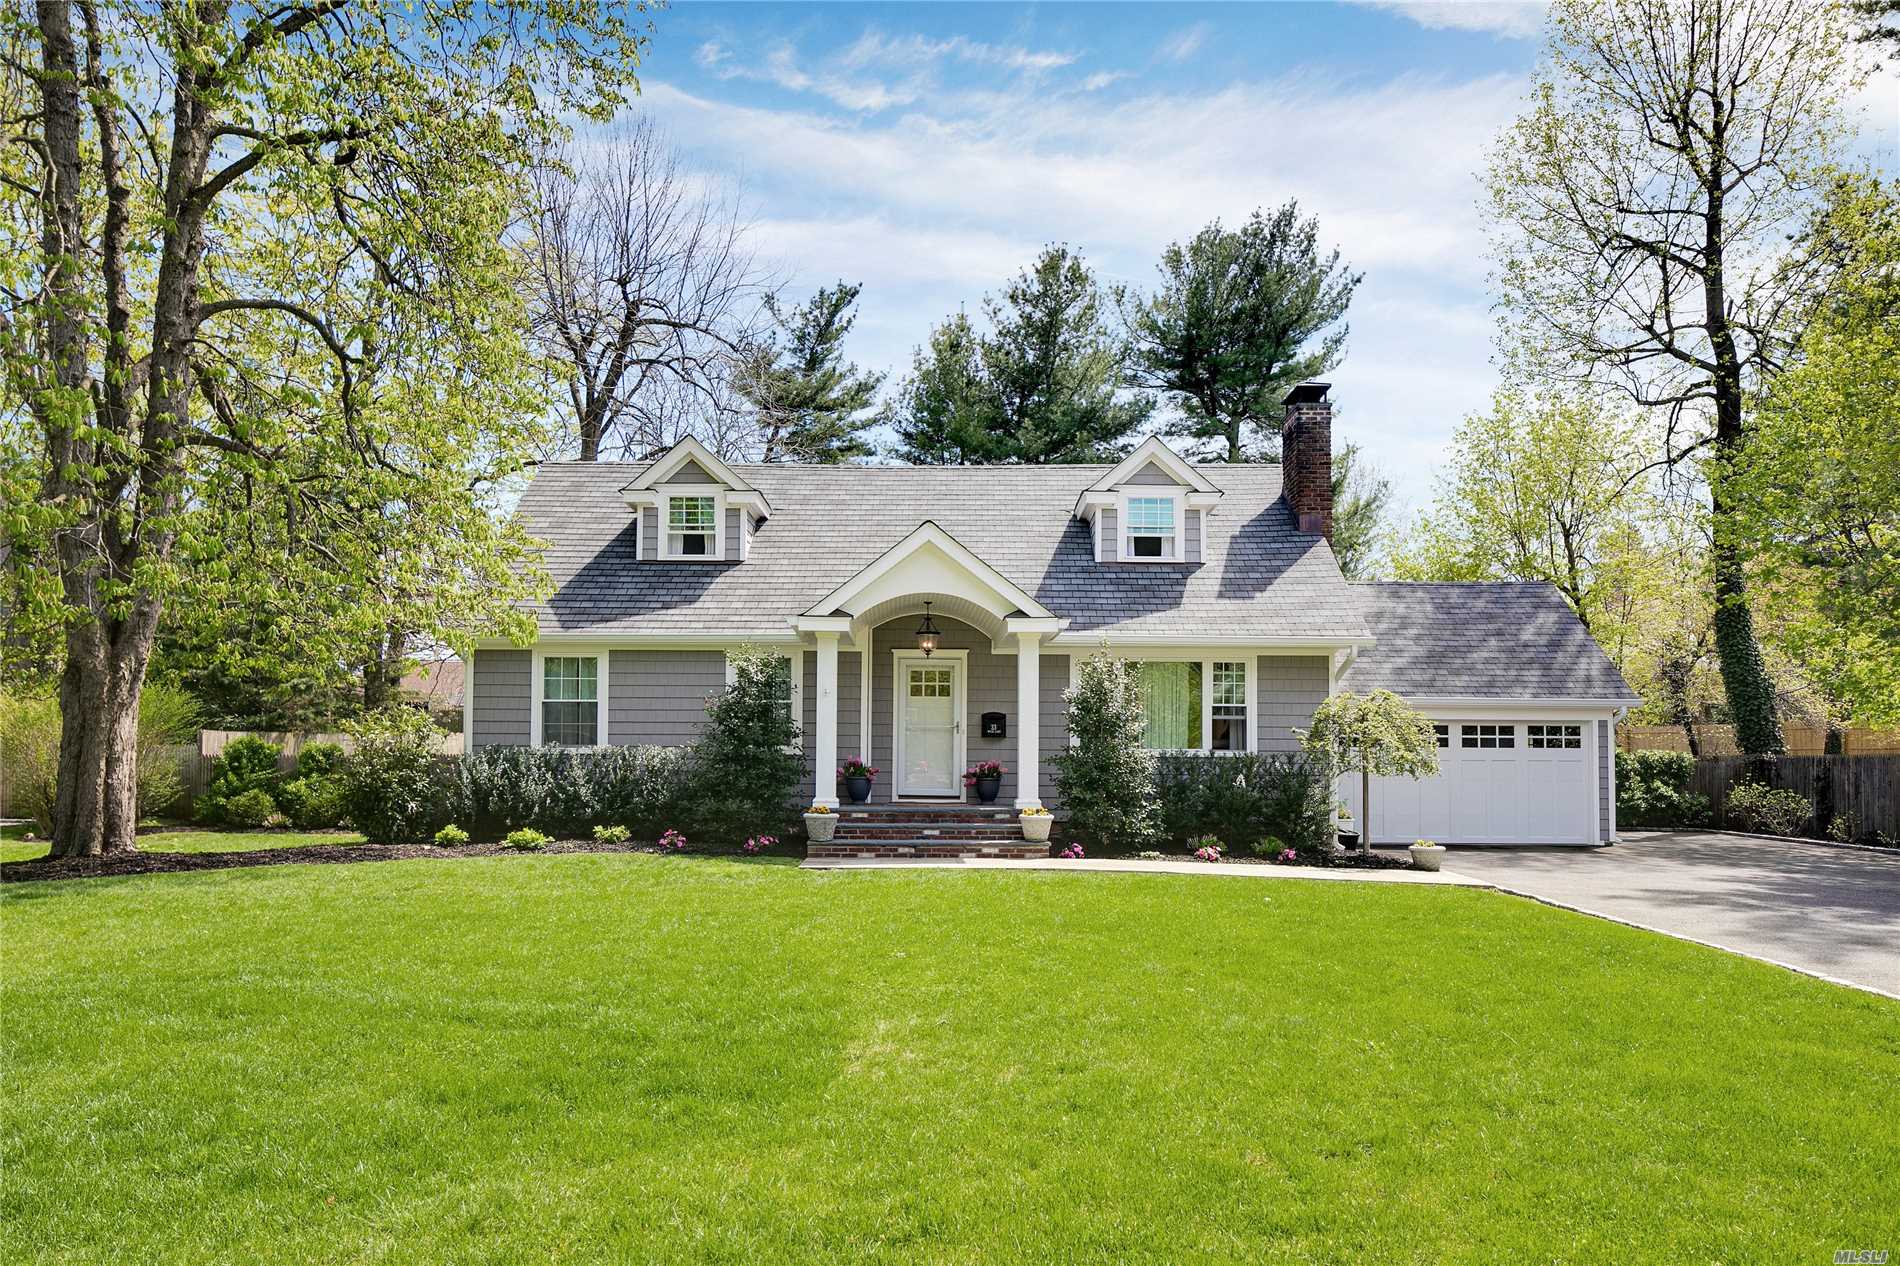 Picture perfect Lattingtown farm ranch in a mid-block location. Beautiful and newly renovated, turn key with new kitchen, living room with fireplace, and master bedroom on the first floor. Finished basement with gym, recreation room, full bath and laundry.